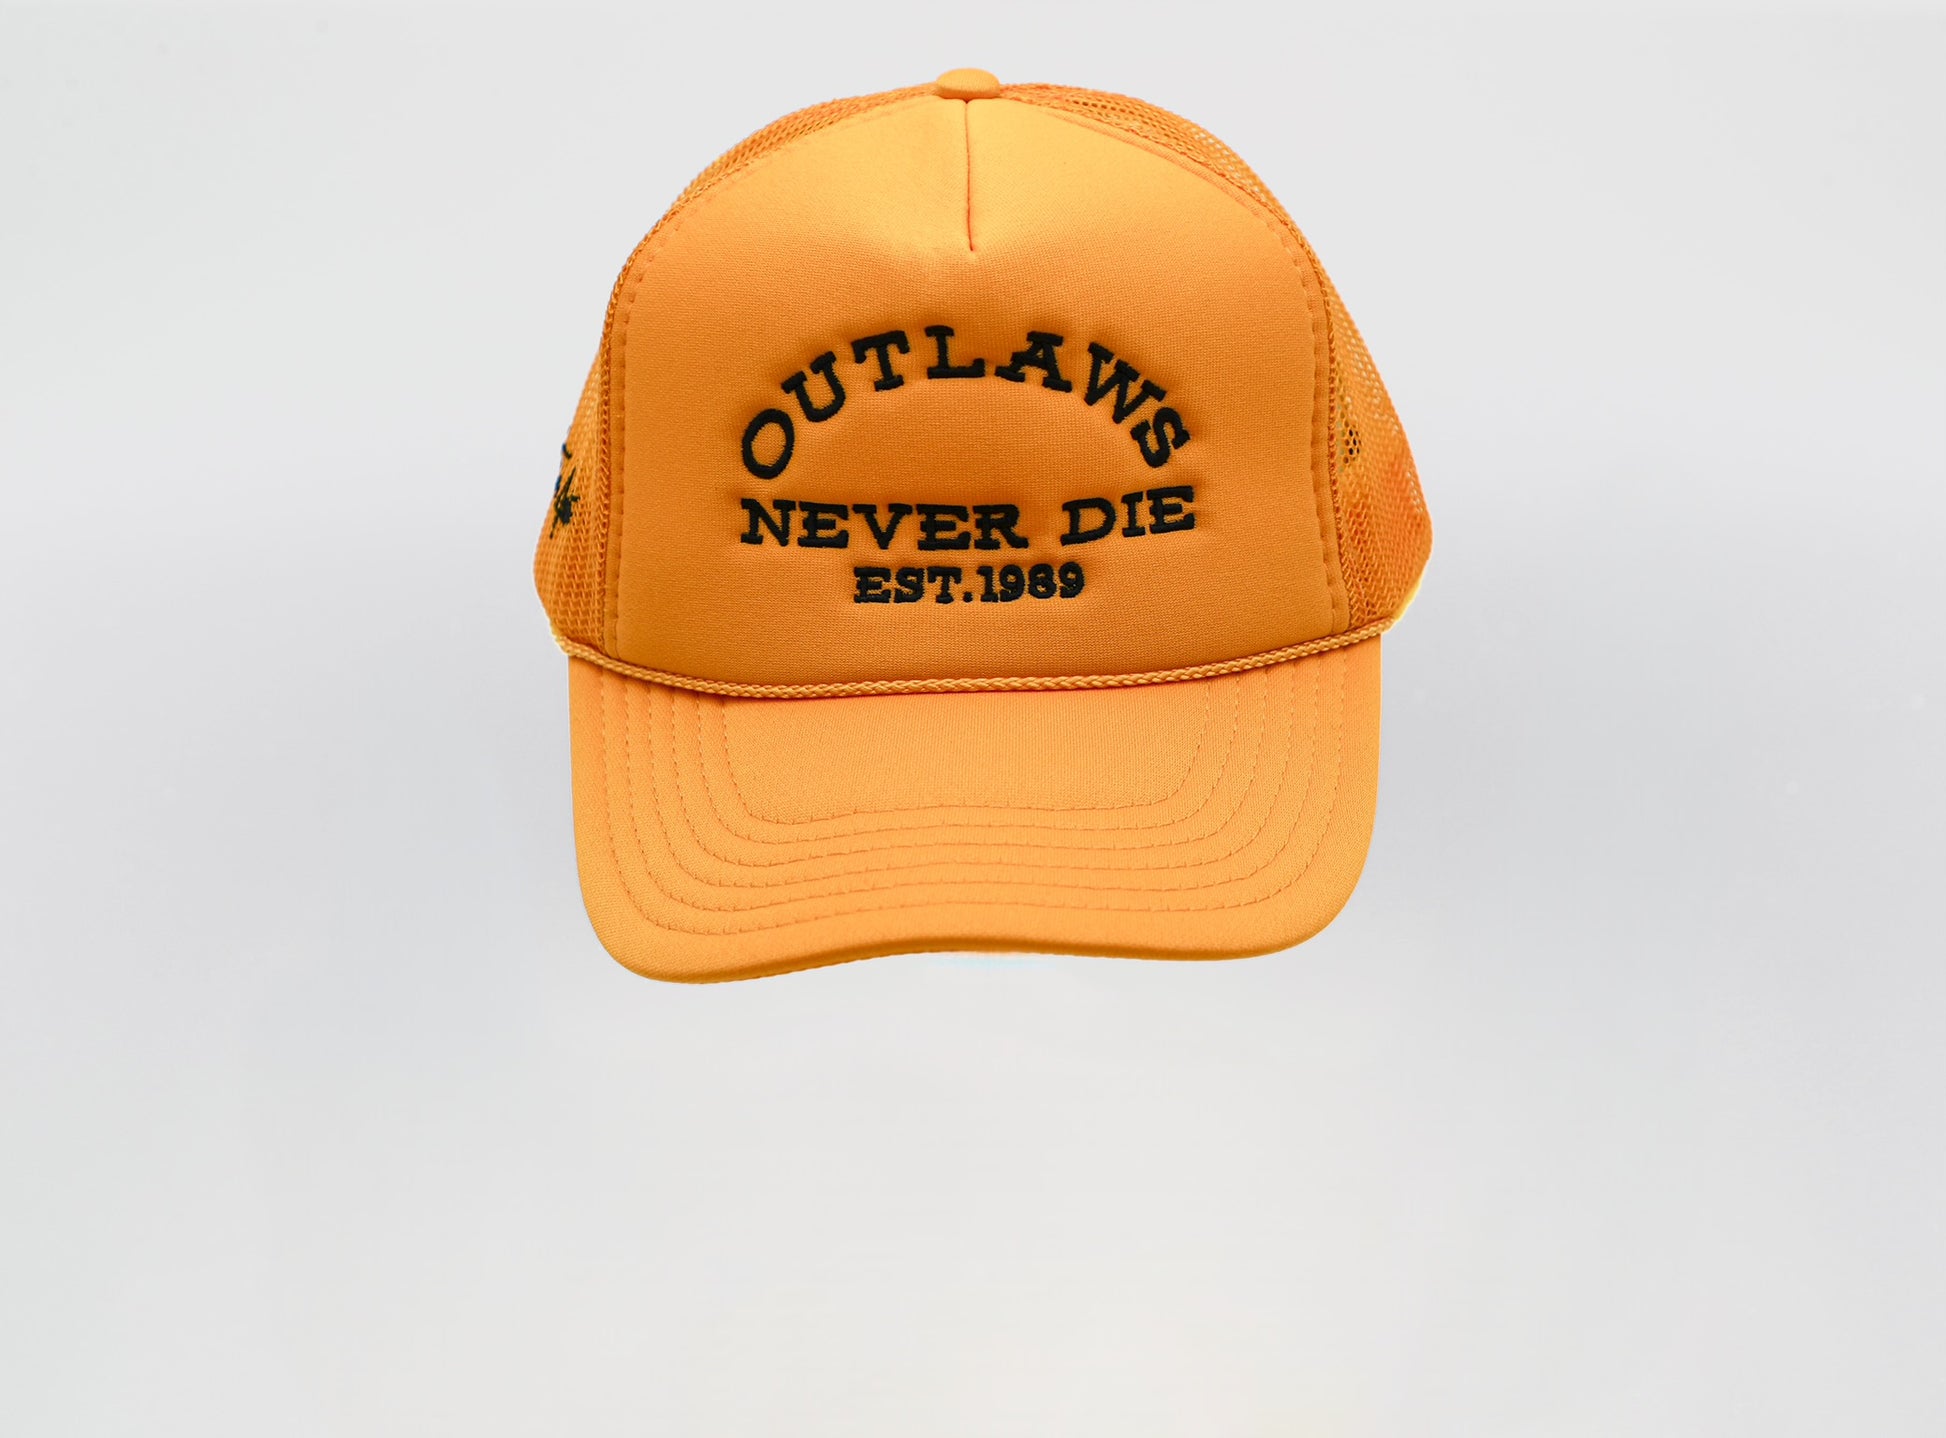 OUTLAWS NEVER DIE Trucker Gold